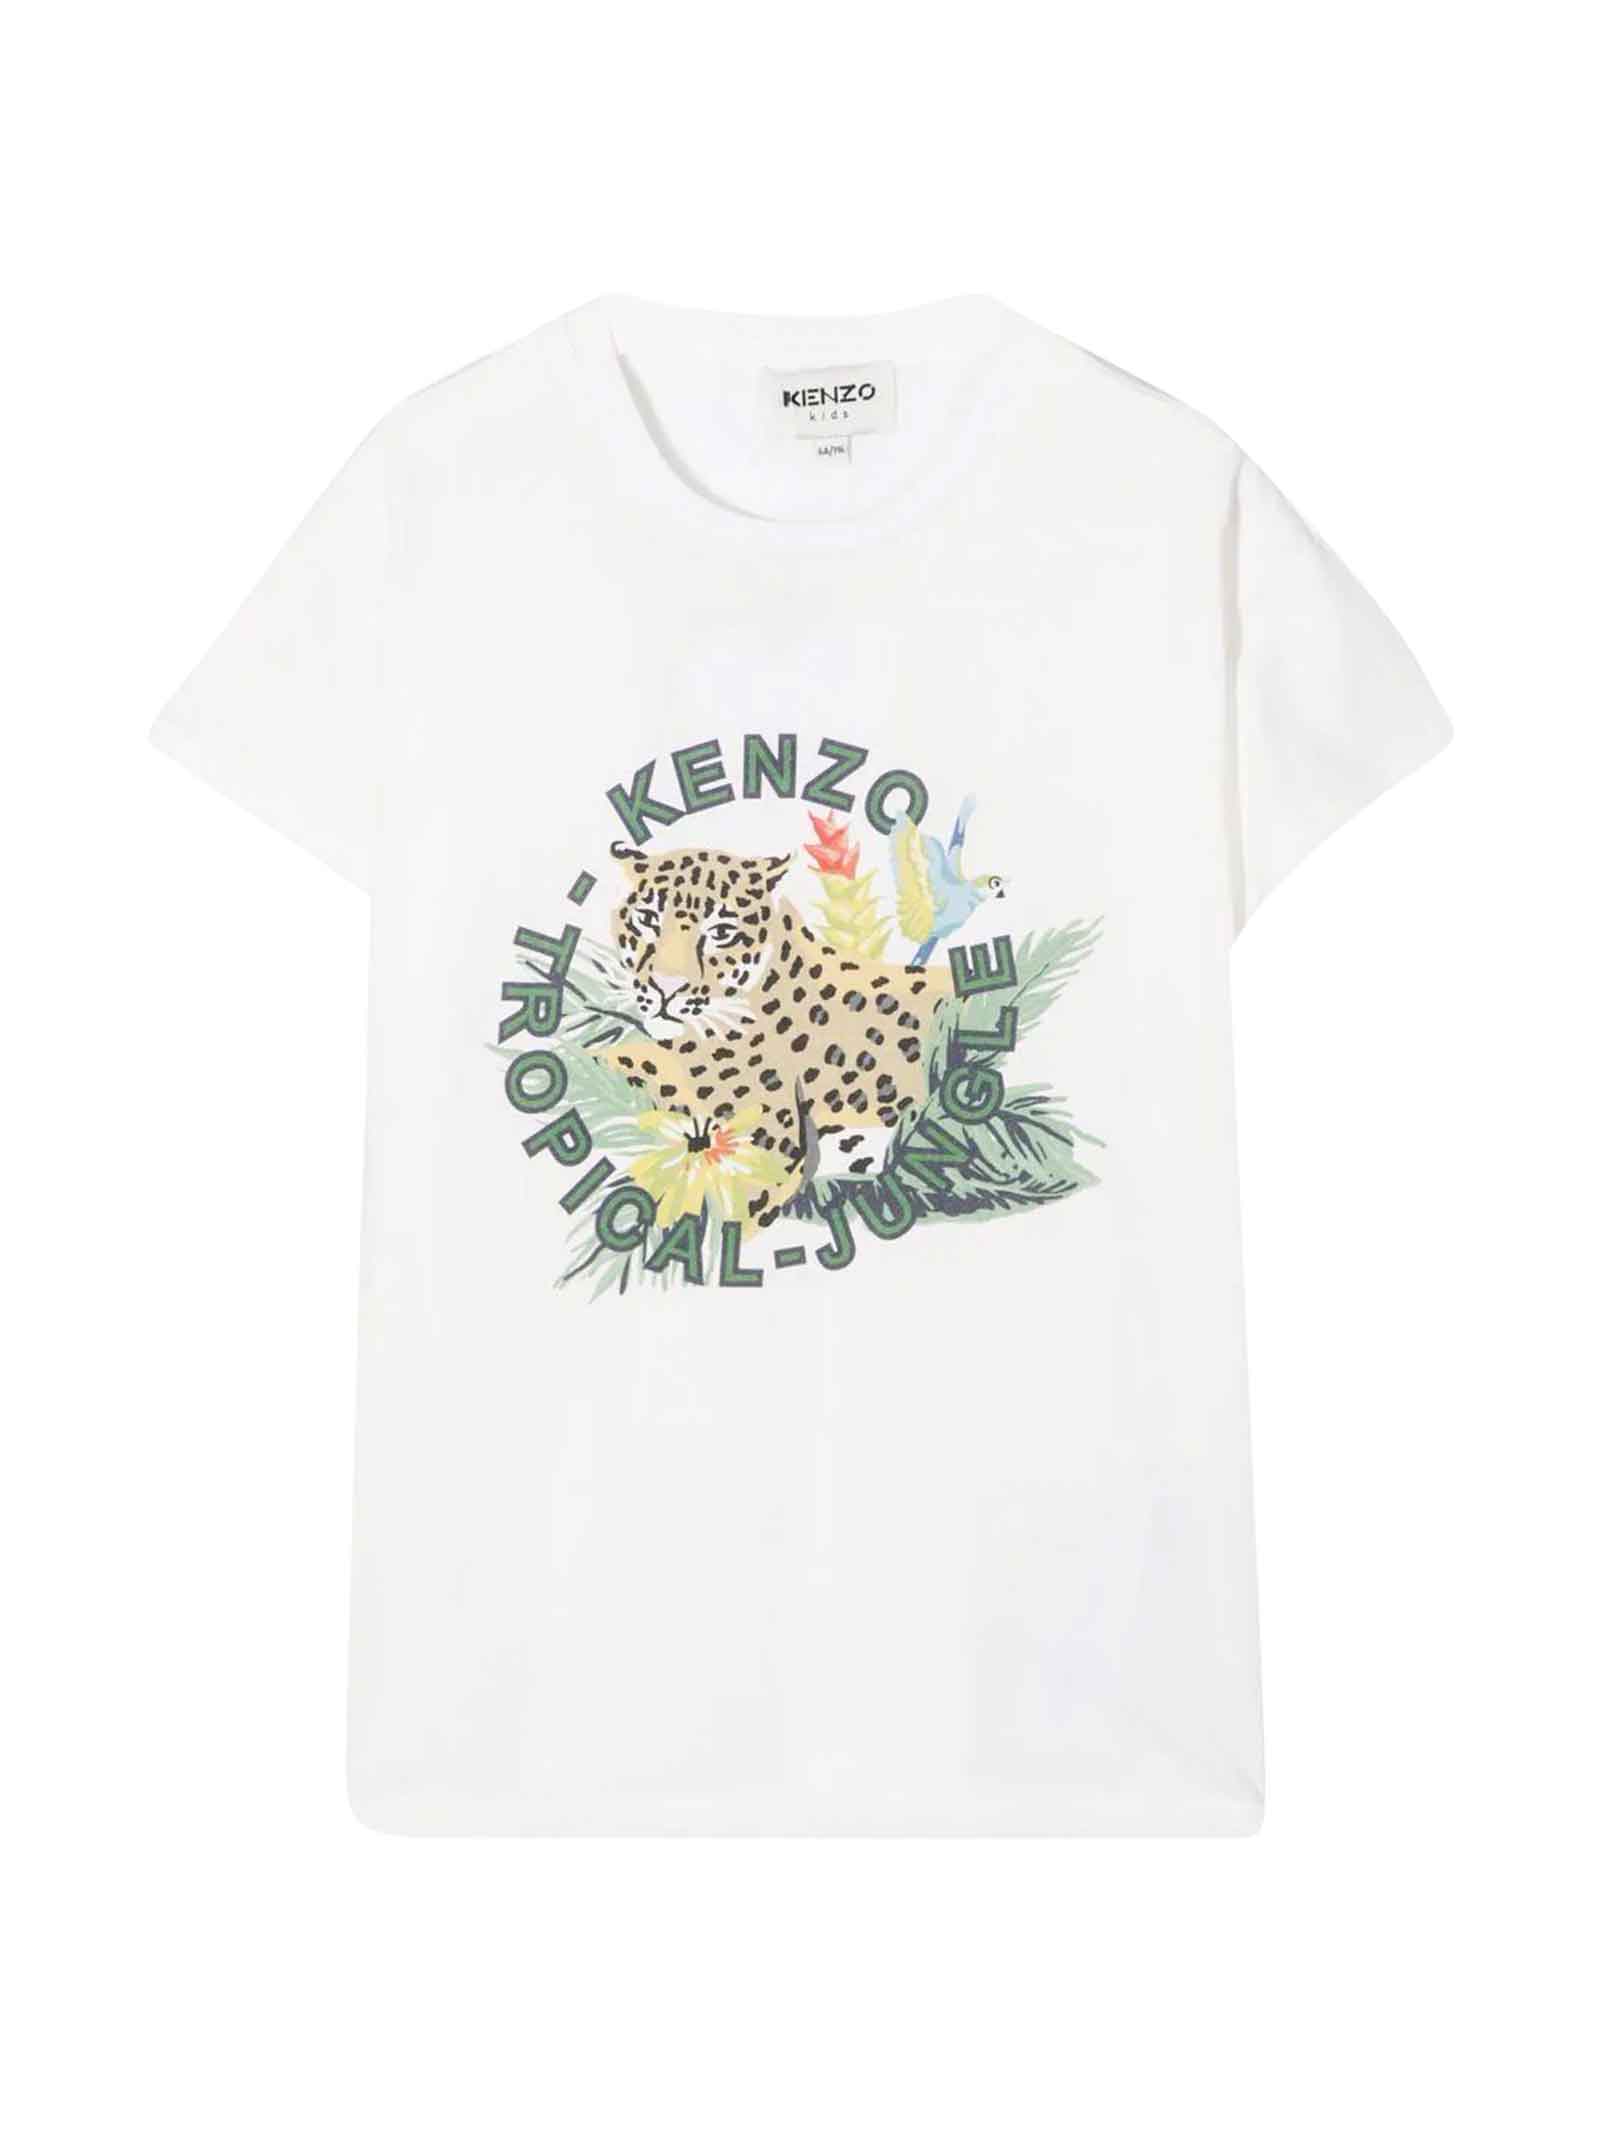 Kenzo Kids White Teen Unisex T-shirt With Print On The Chest, Crew Neck, Short Sleeves And Straight Hem By.